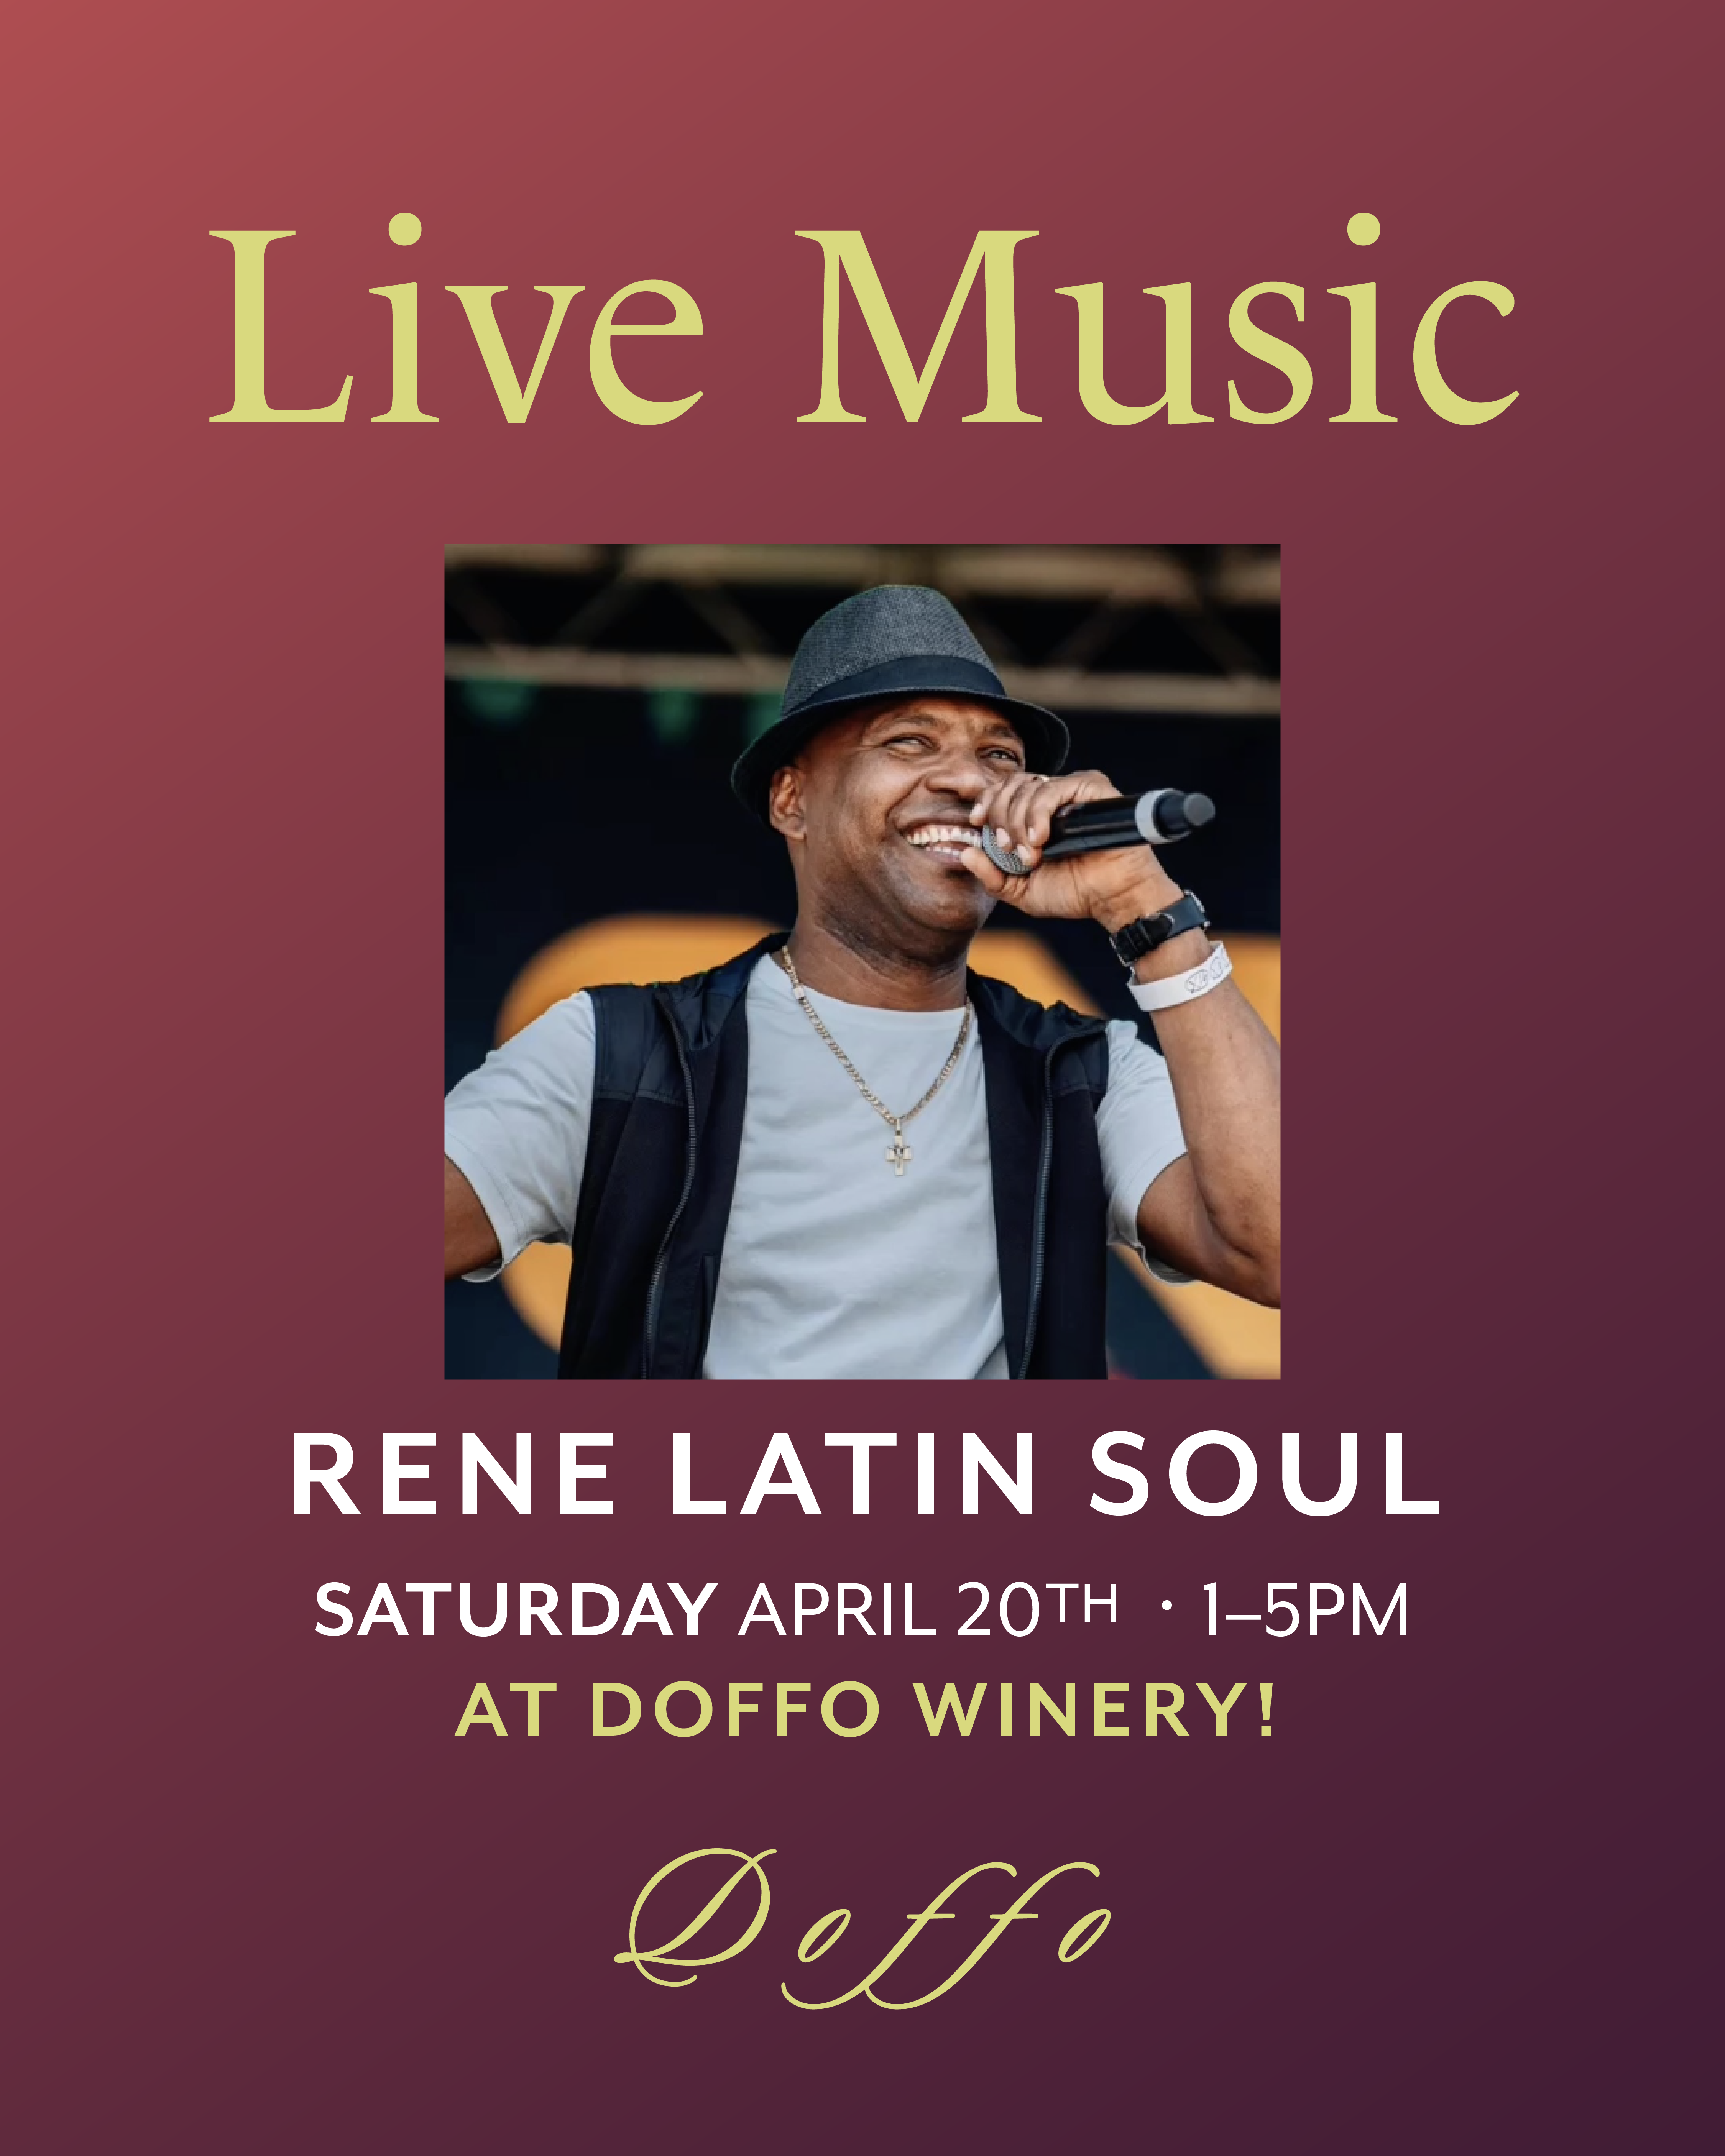 Live Music at the Doffo Winery | Rene Latin Soul